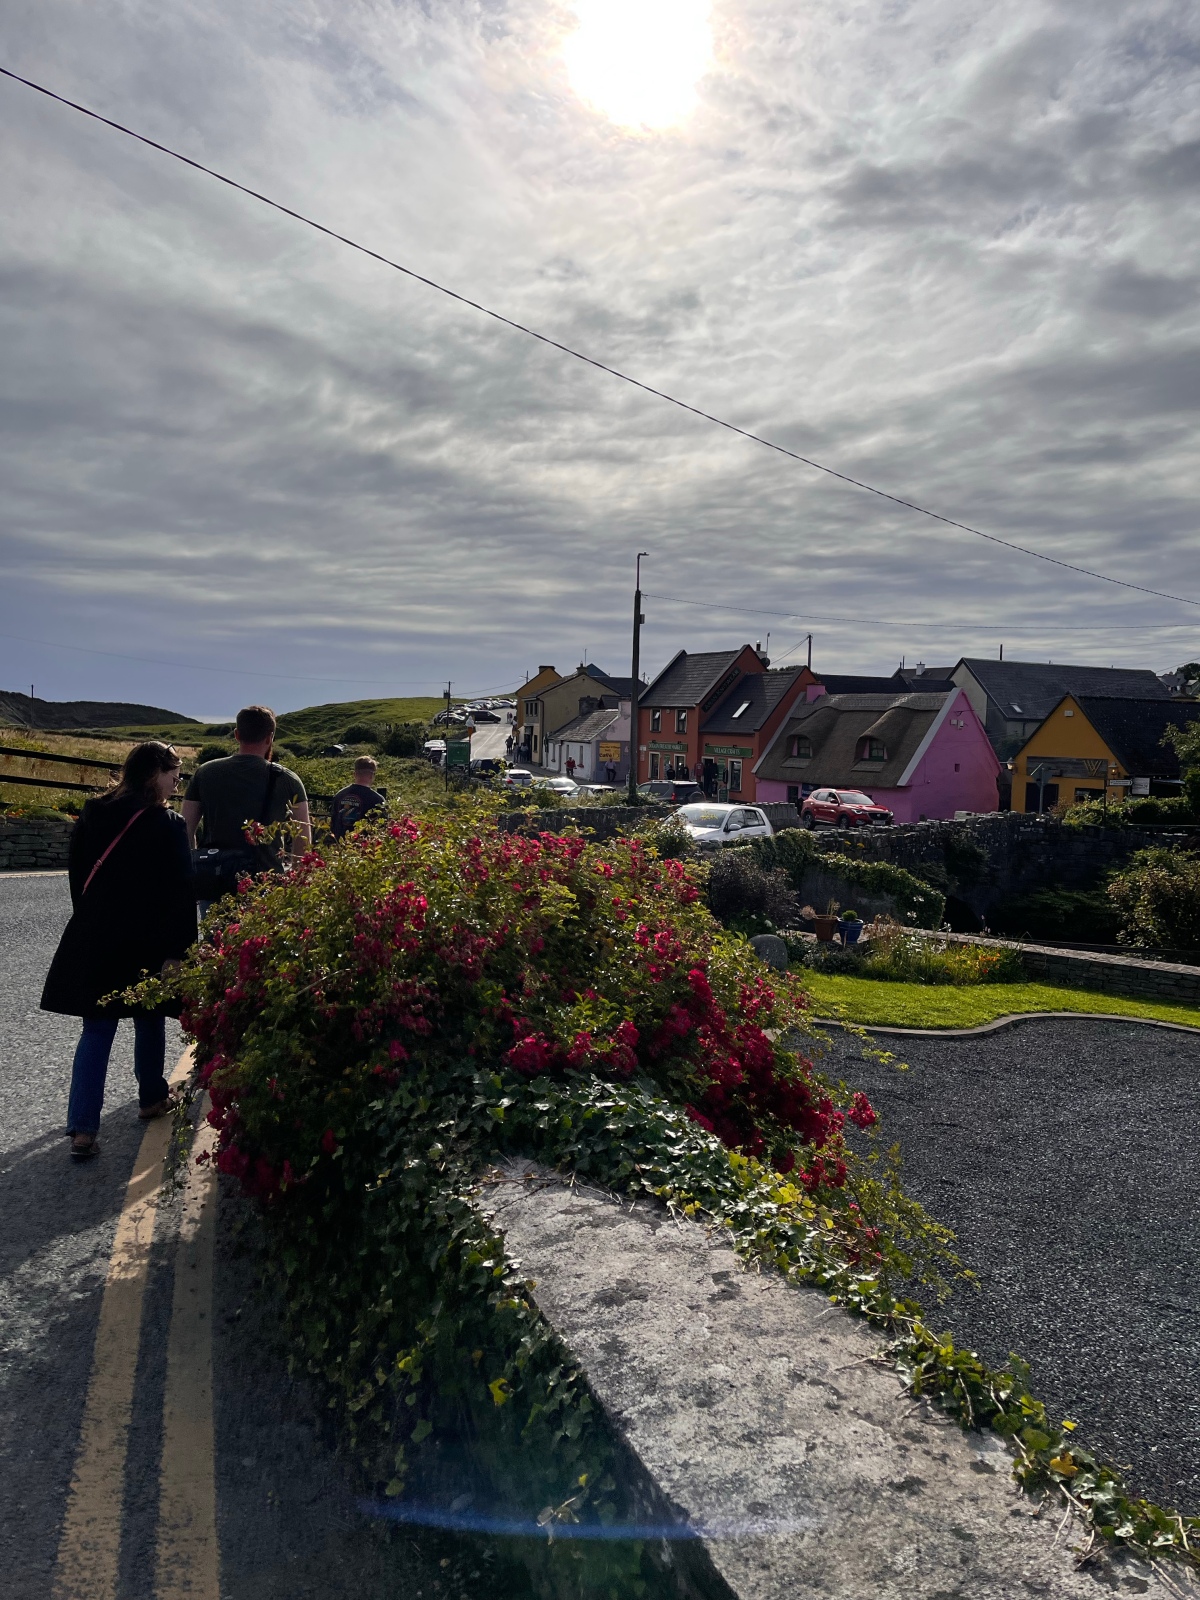 Ireland Sisters Trip: Doolin, Galway, the Cliffs of Moher, and the Aran Islands